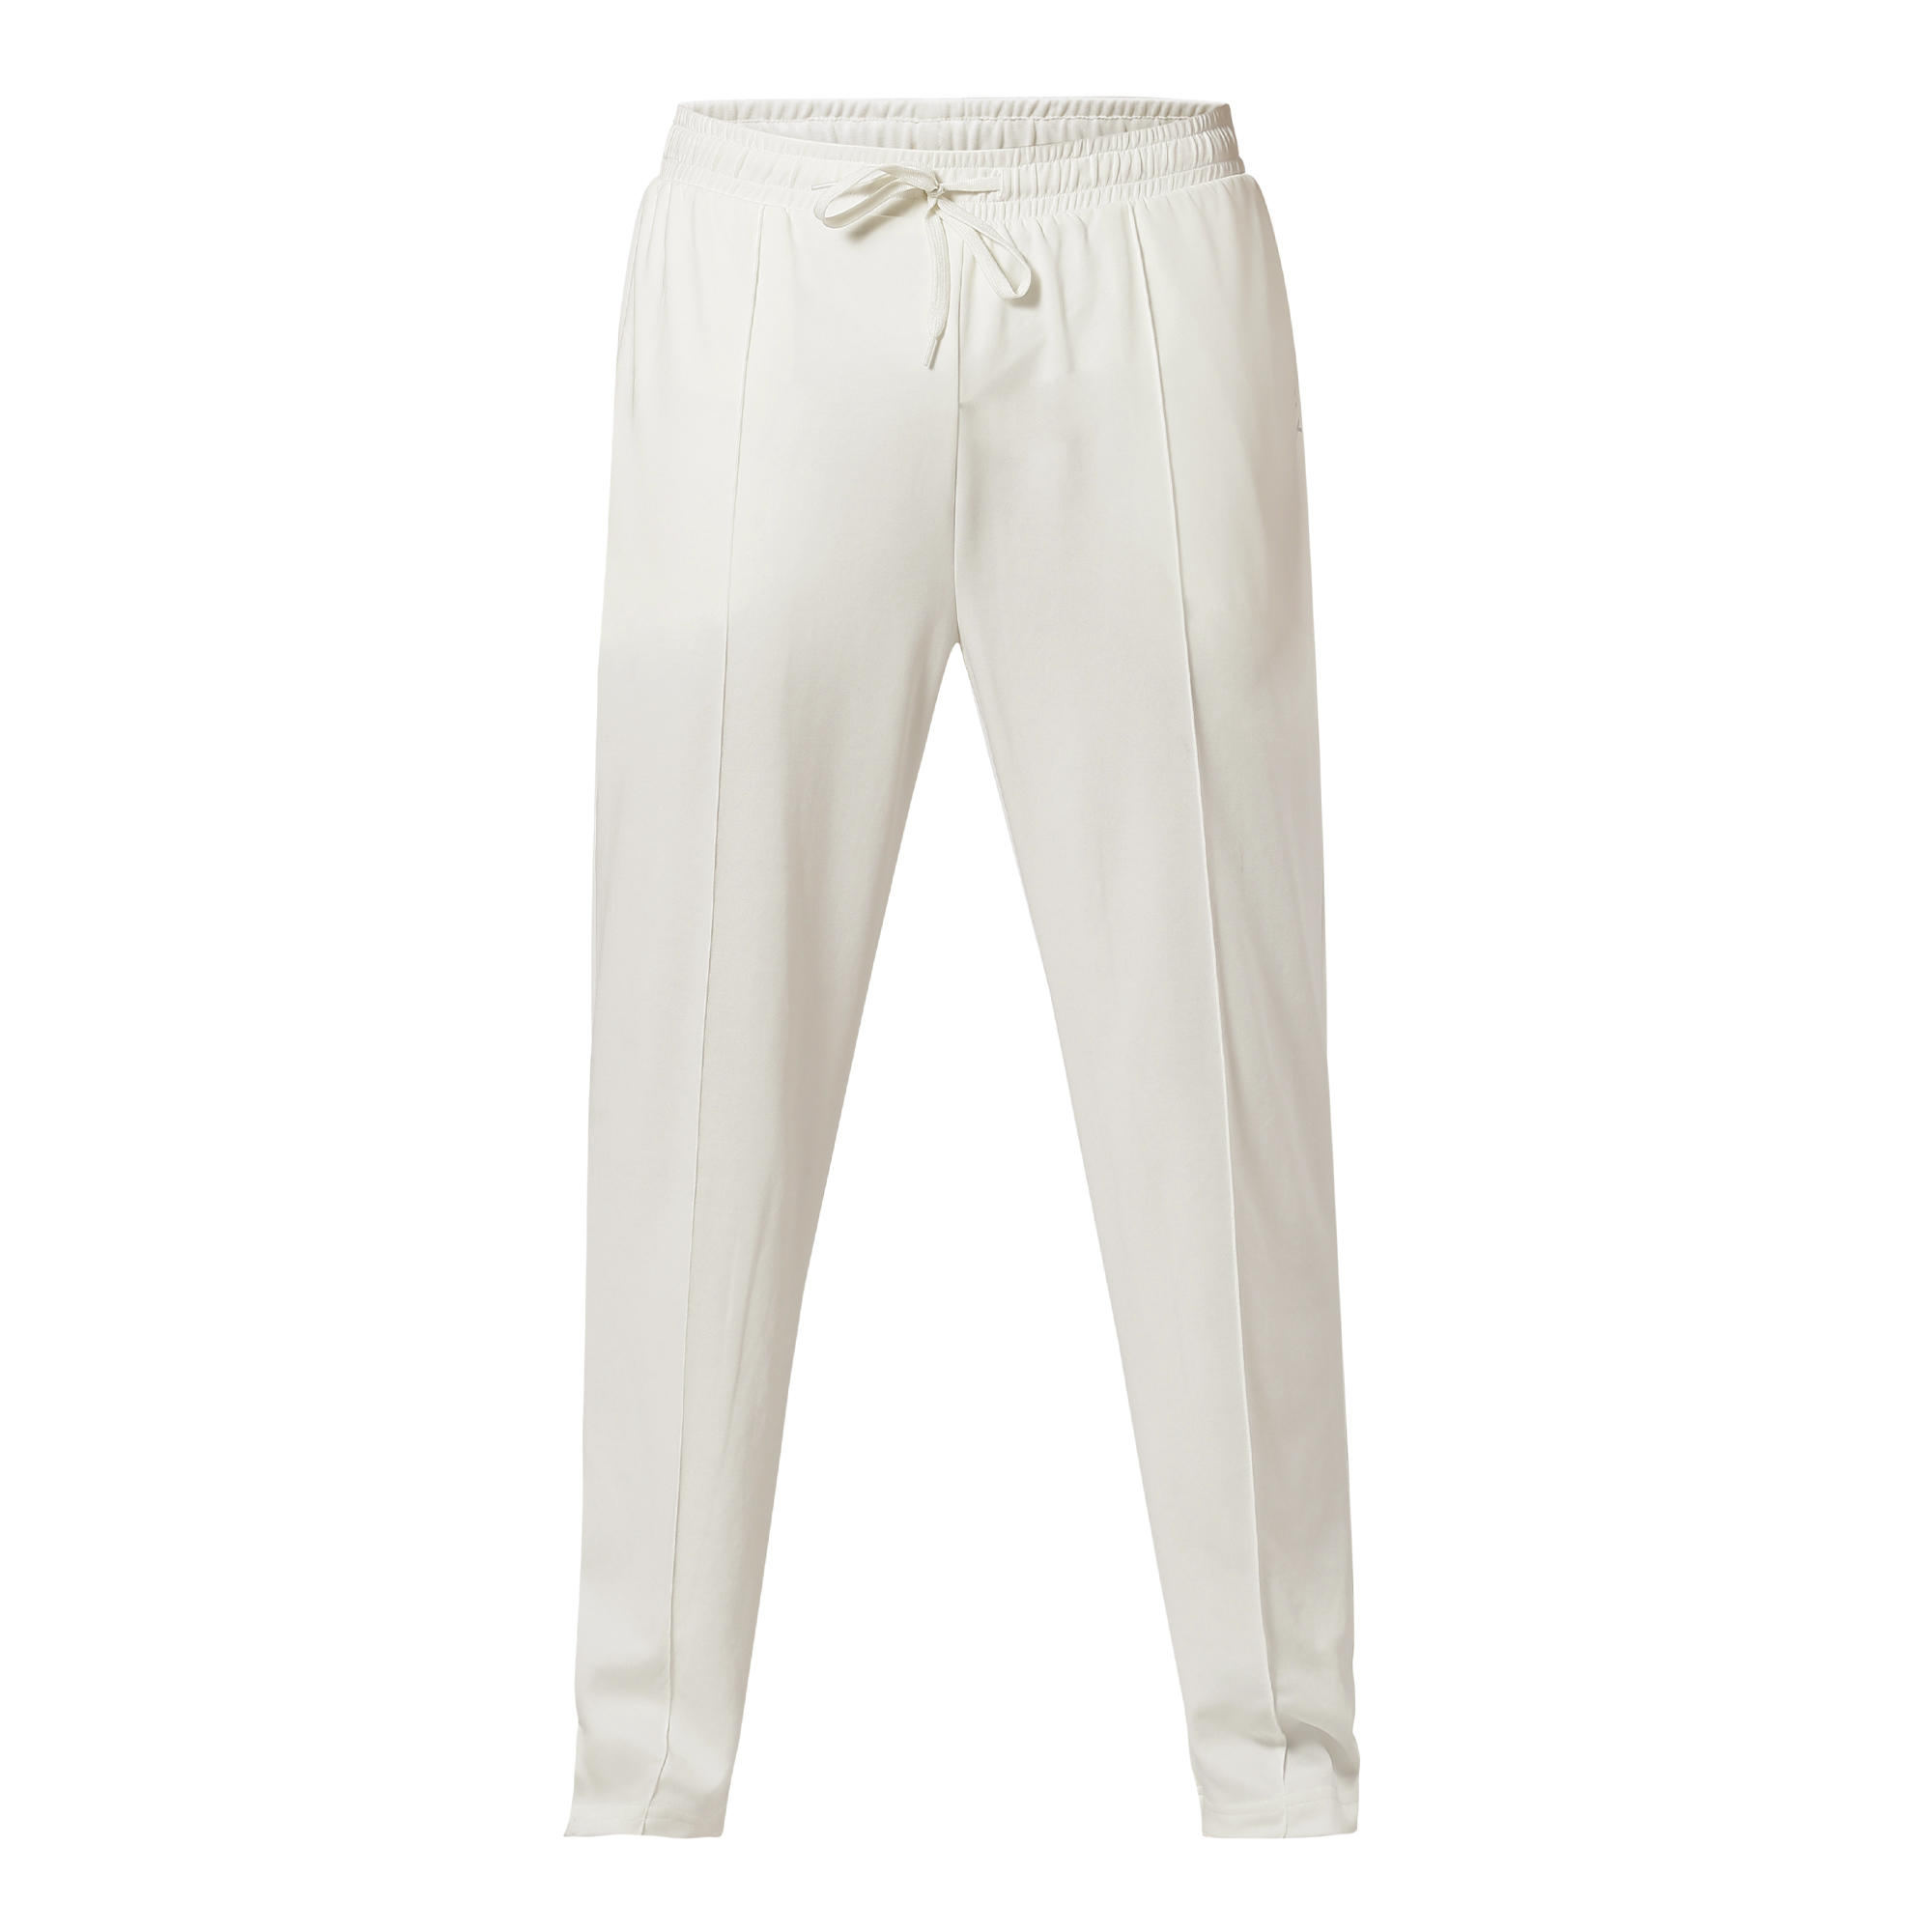 KIDS QUICK DRY CRICKET TRACKPANTS IVORY TSR 100 WHITE